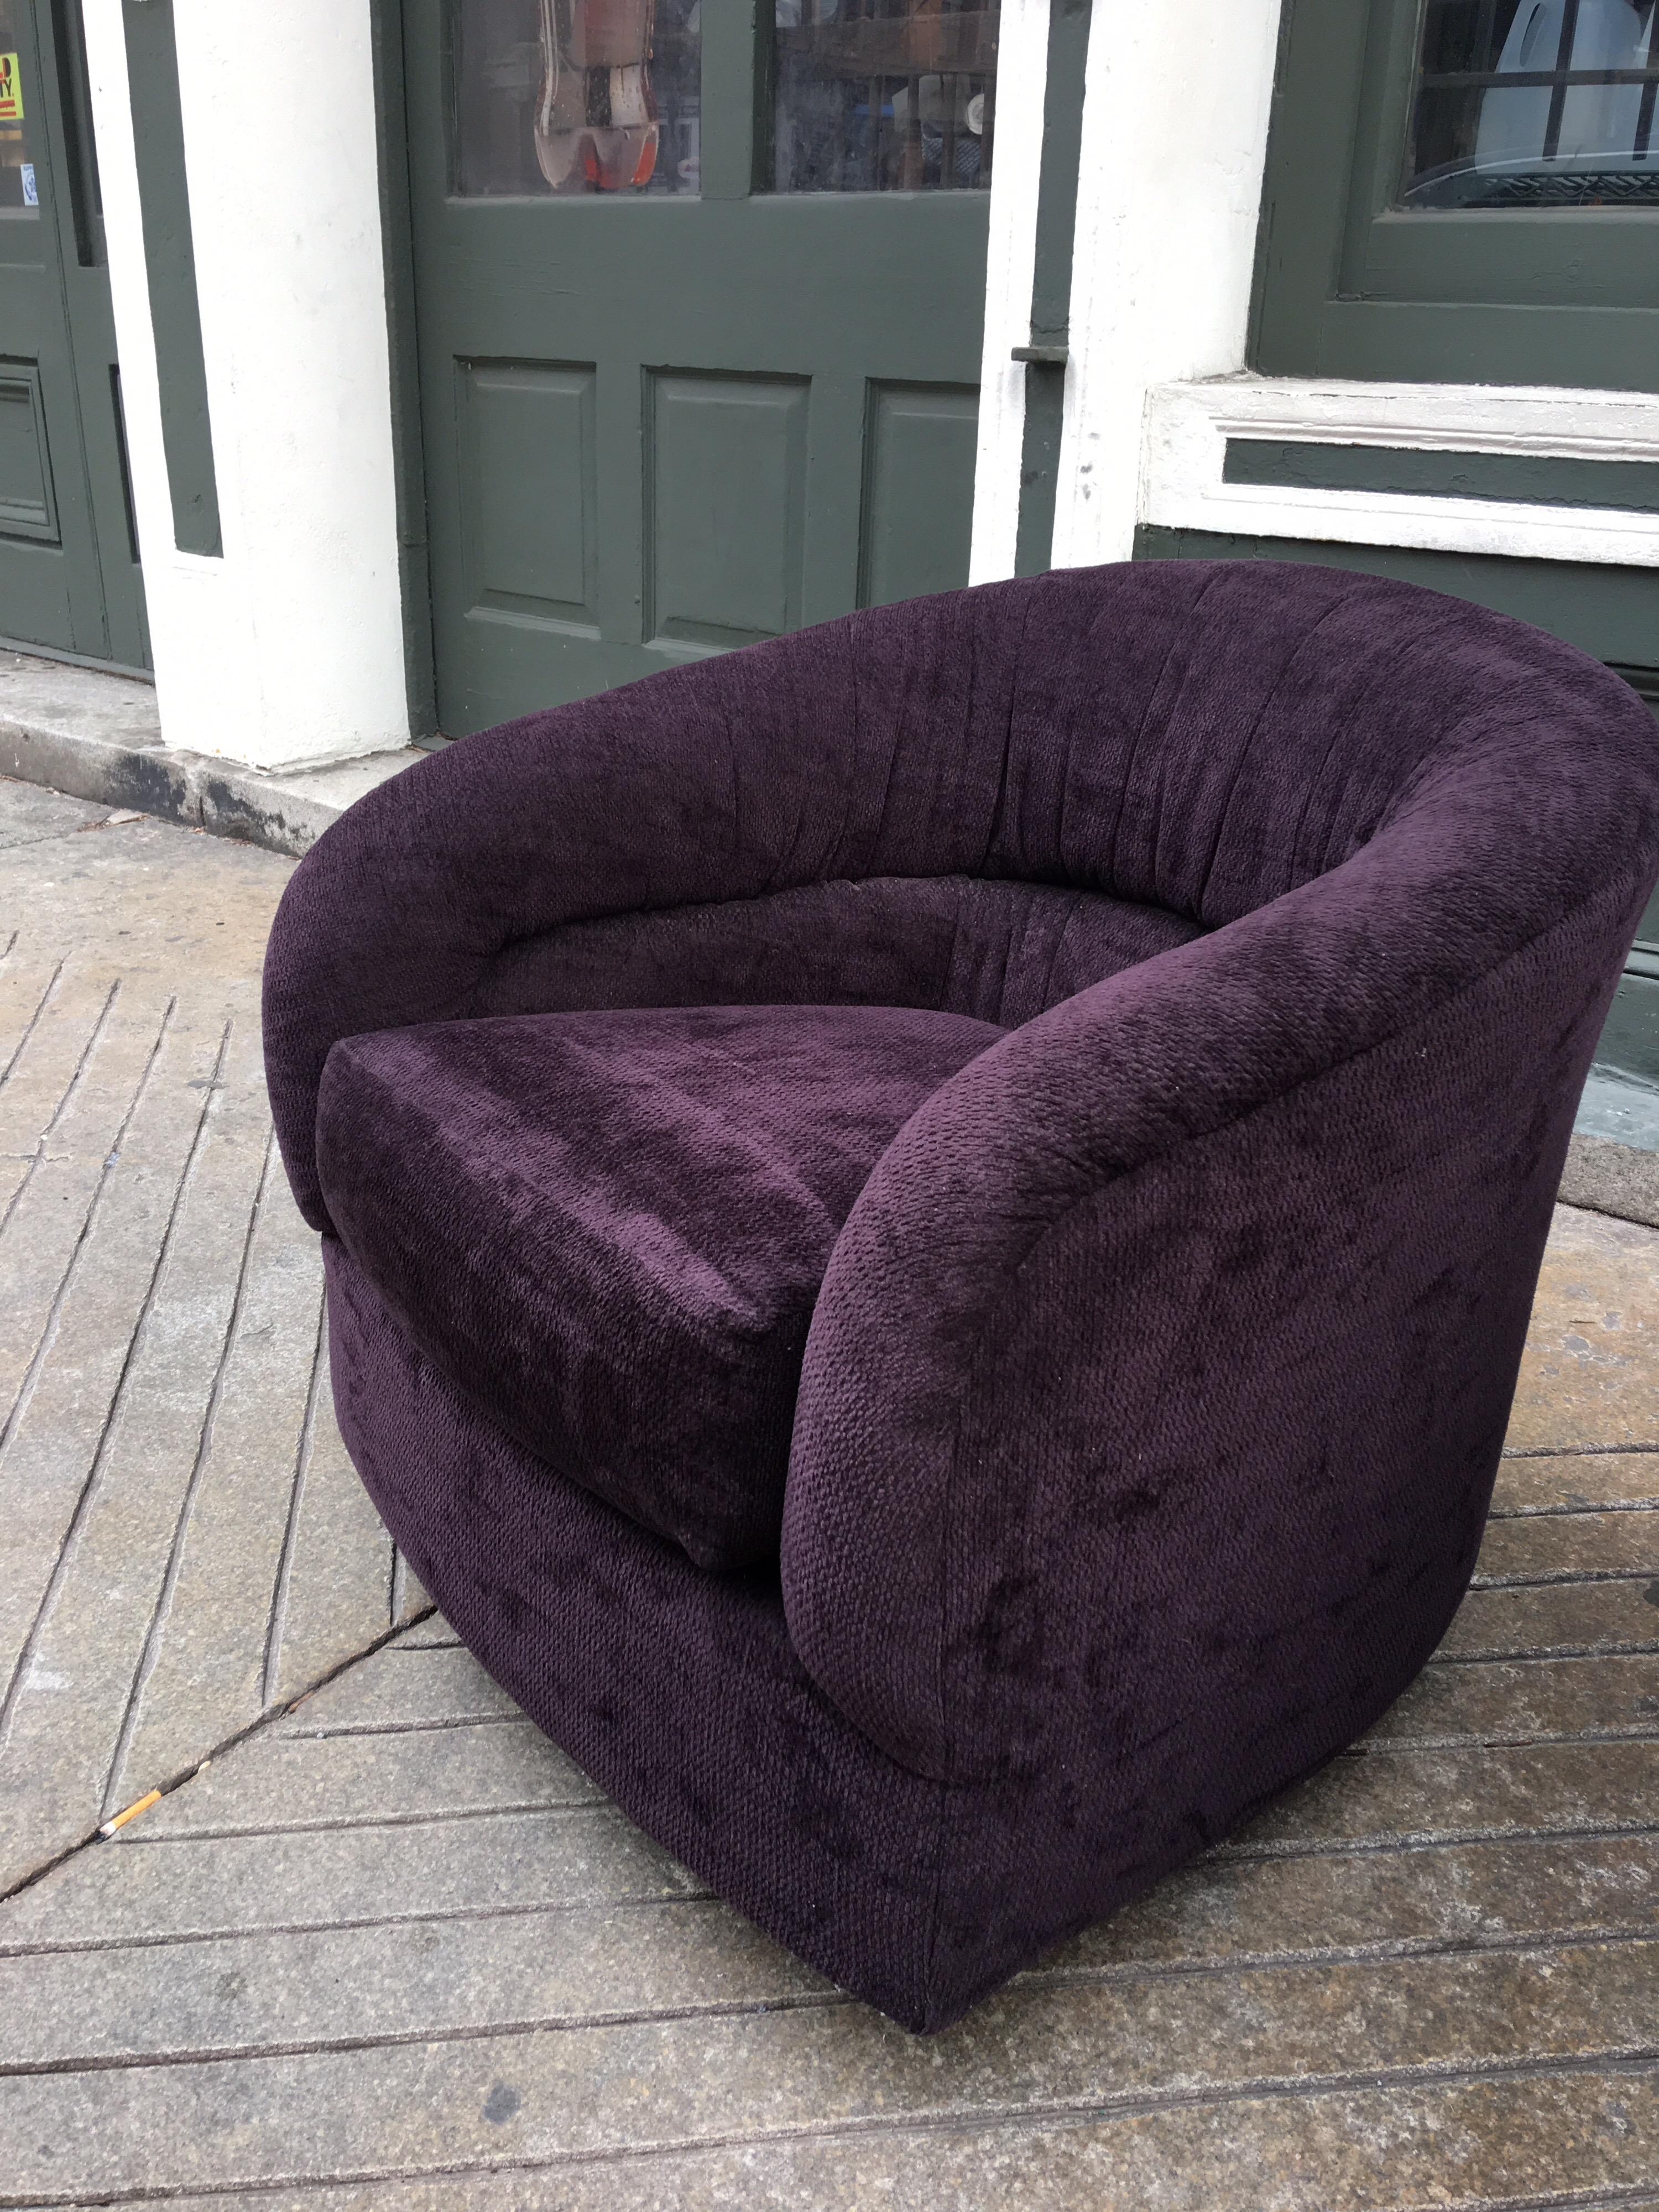 Pair of swivel barrel chairs in a plum fabric. Both chairs swivel and one has the extra feature of rocking! Very comfy rounded back chairs!